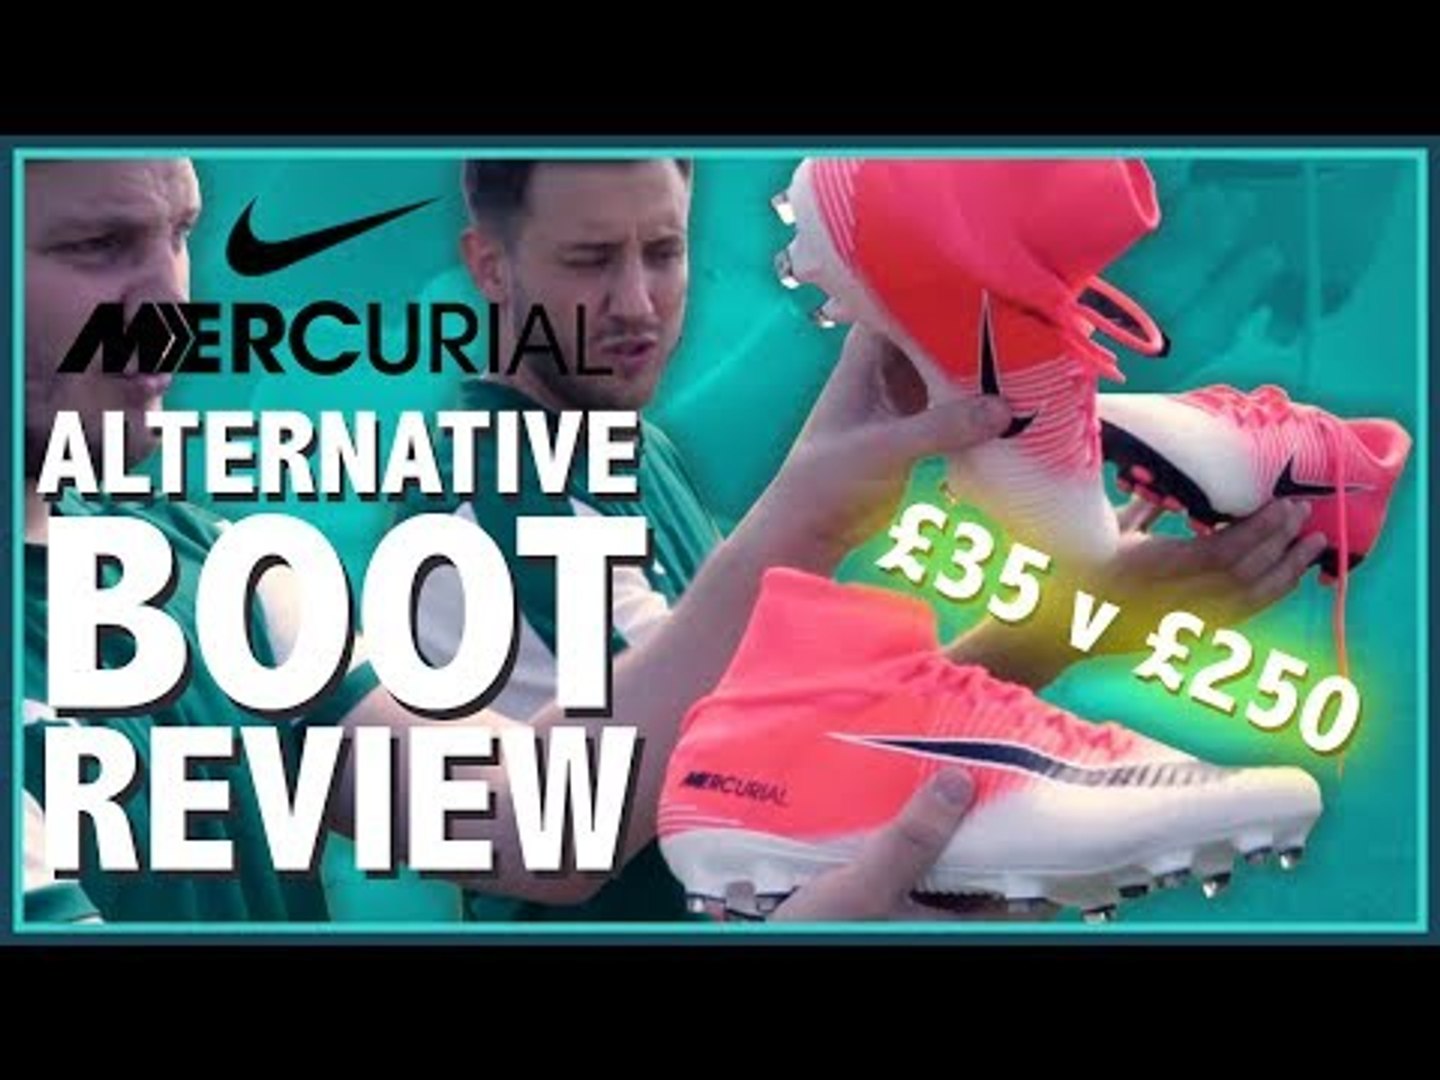 $35 v $300 FOOTBALL BOOTS! | ALTERNATIVE BOOT REVIEW | Nike Mercurial Vapor  Superfly - video Dailymotion